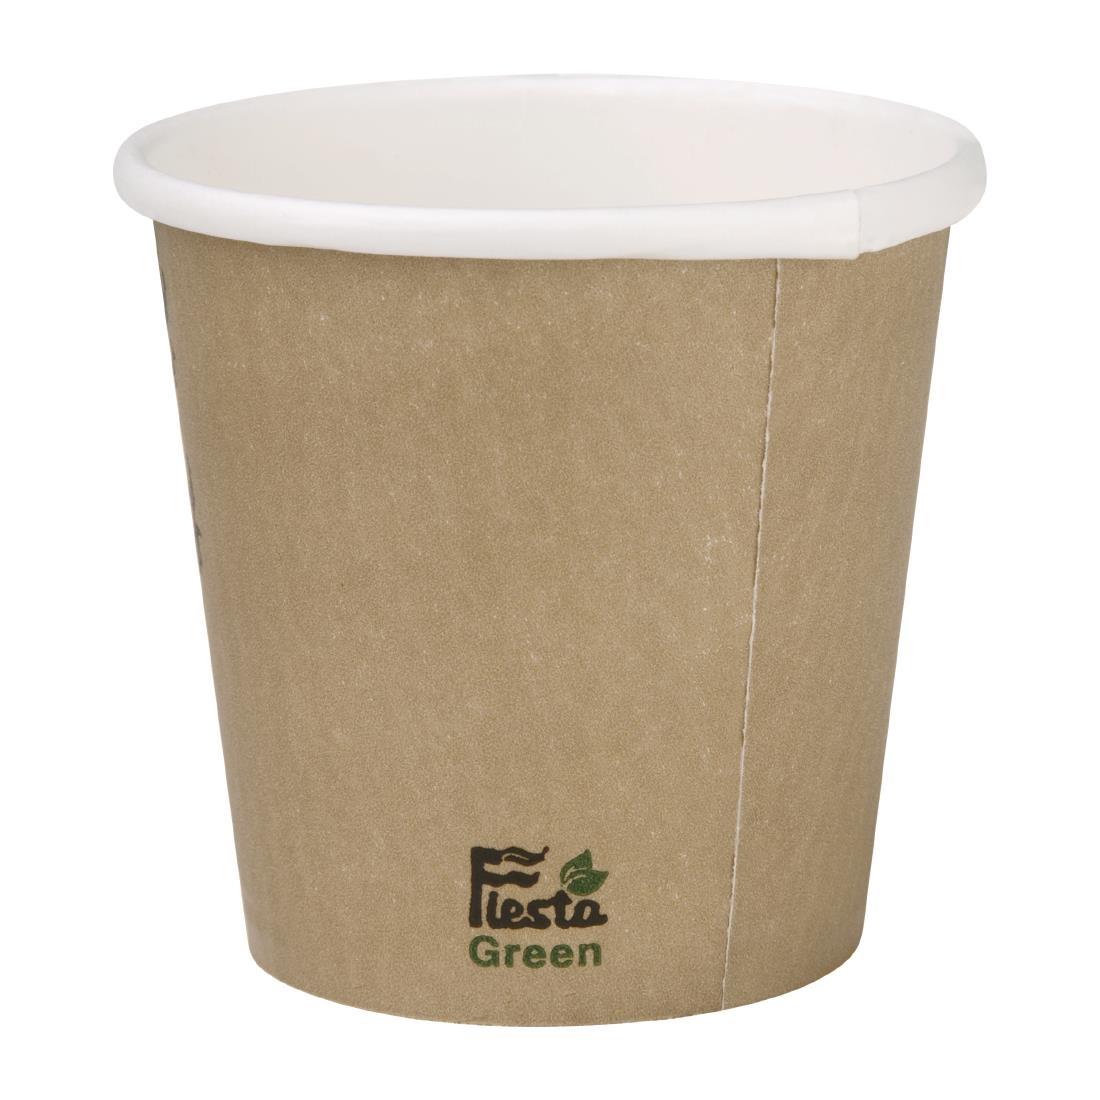 Fiesta Compostable Espresso Cups Single Wall 113ml / 4oz (Pack of 1000) - DY981  - 2